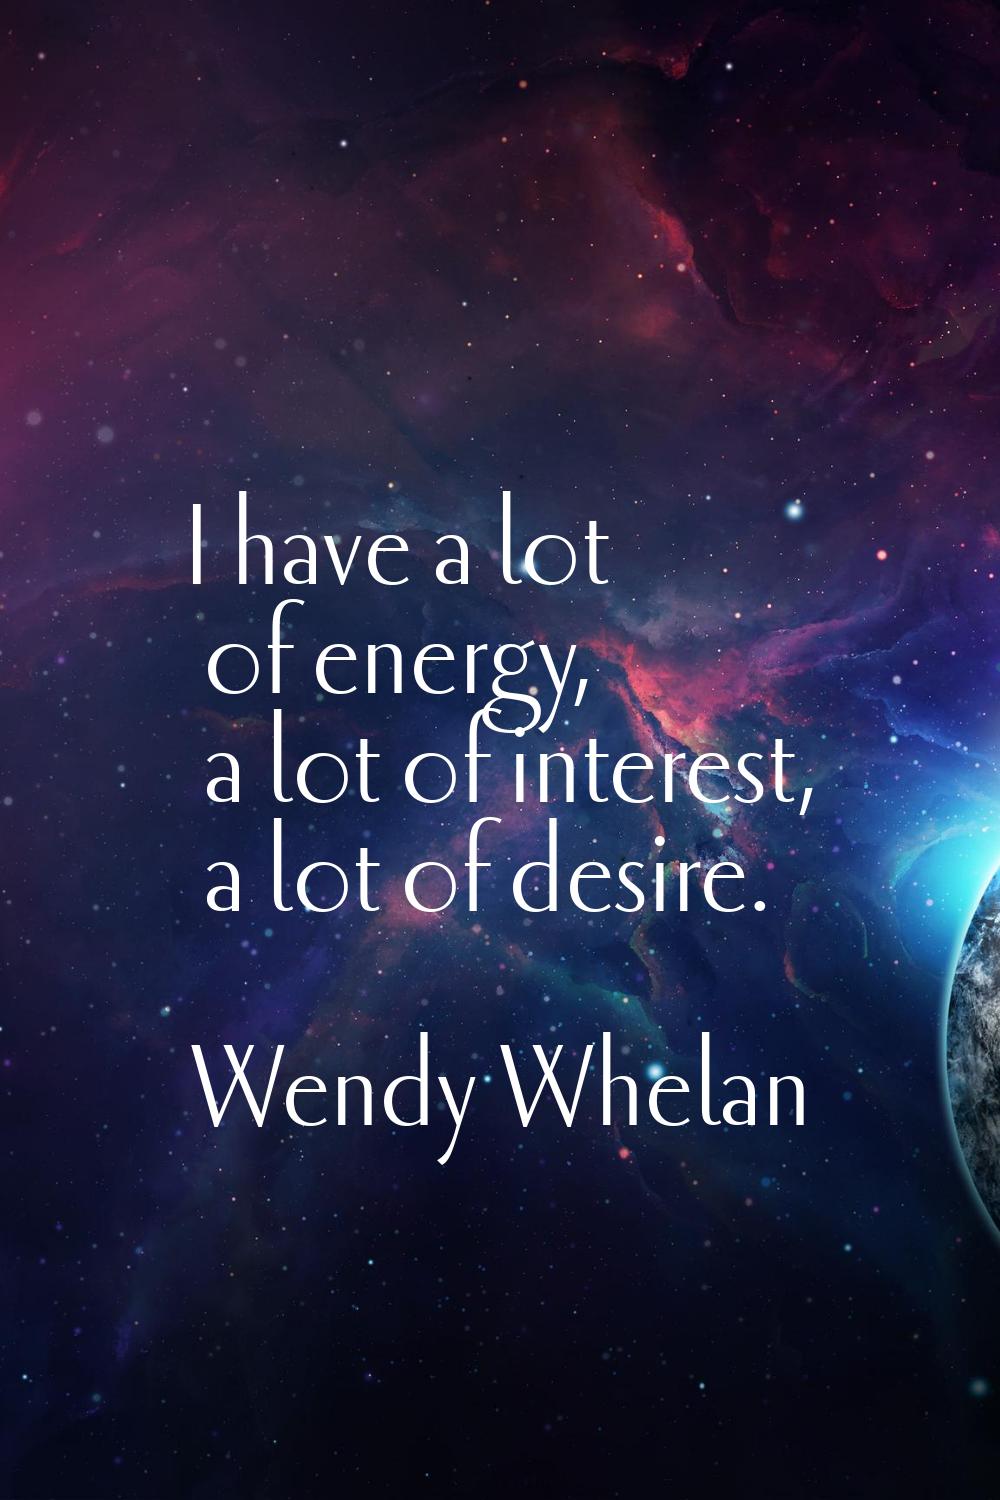 I have a lot of energy, a lot of interest, a lot of desire.